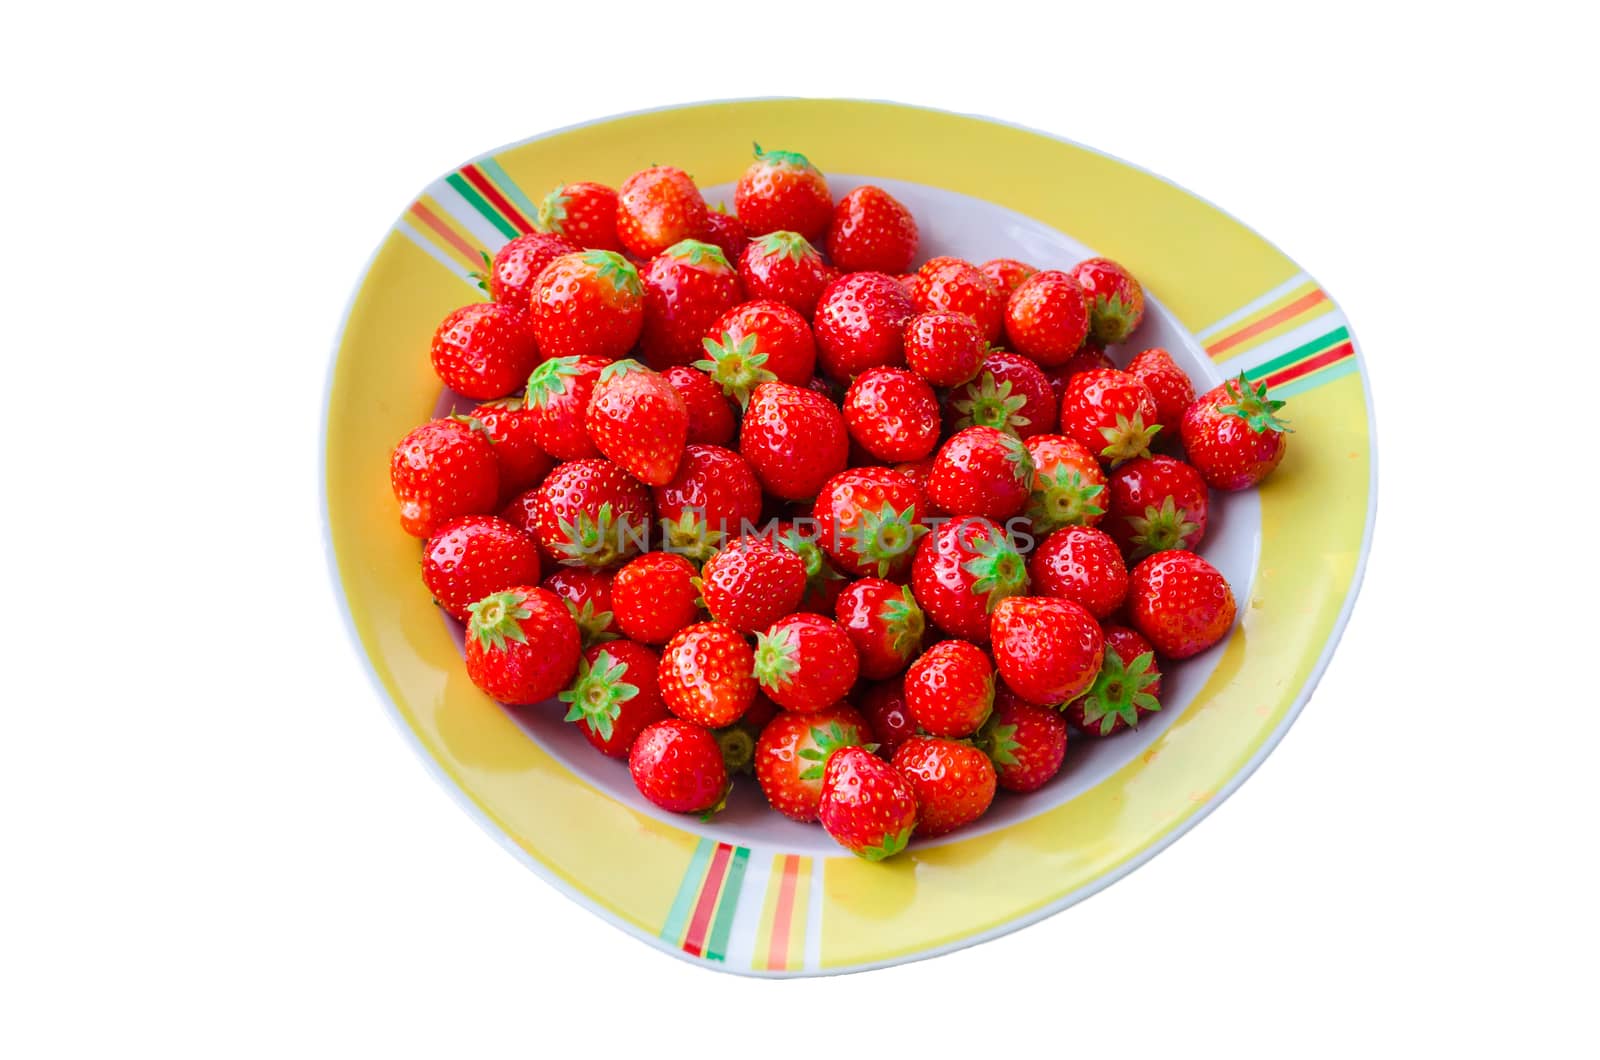 Plate of strawberries on white background
